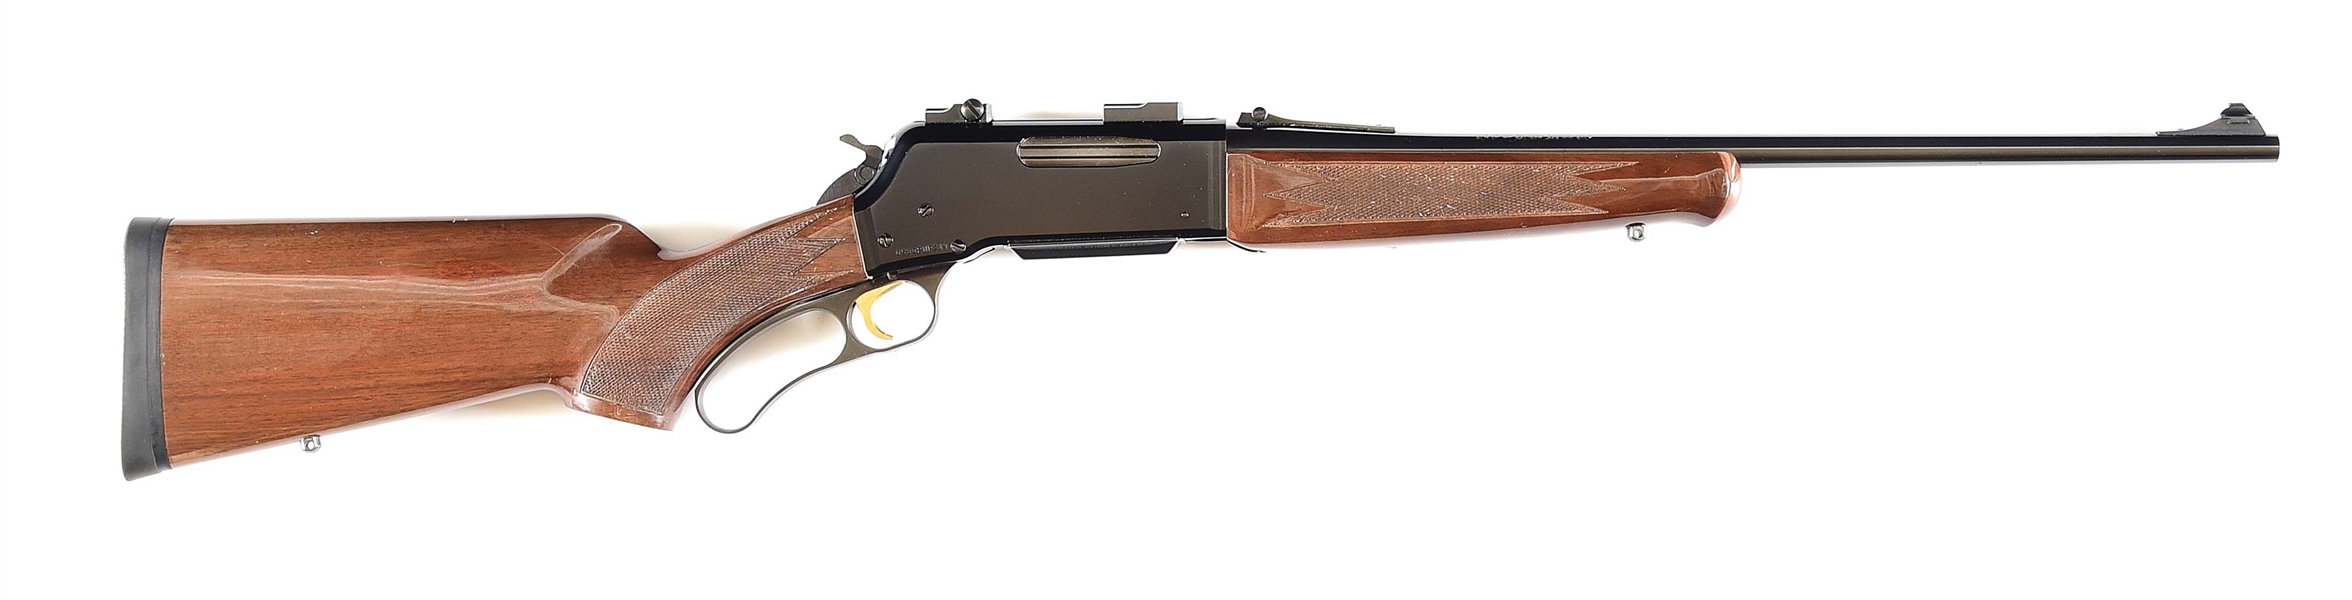 (M) BROWNING BLR LEVER ACTION RIFLE